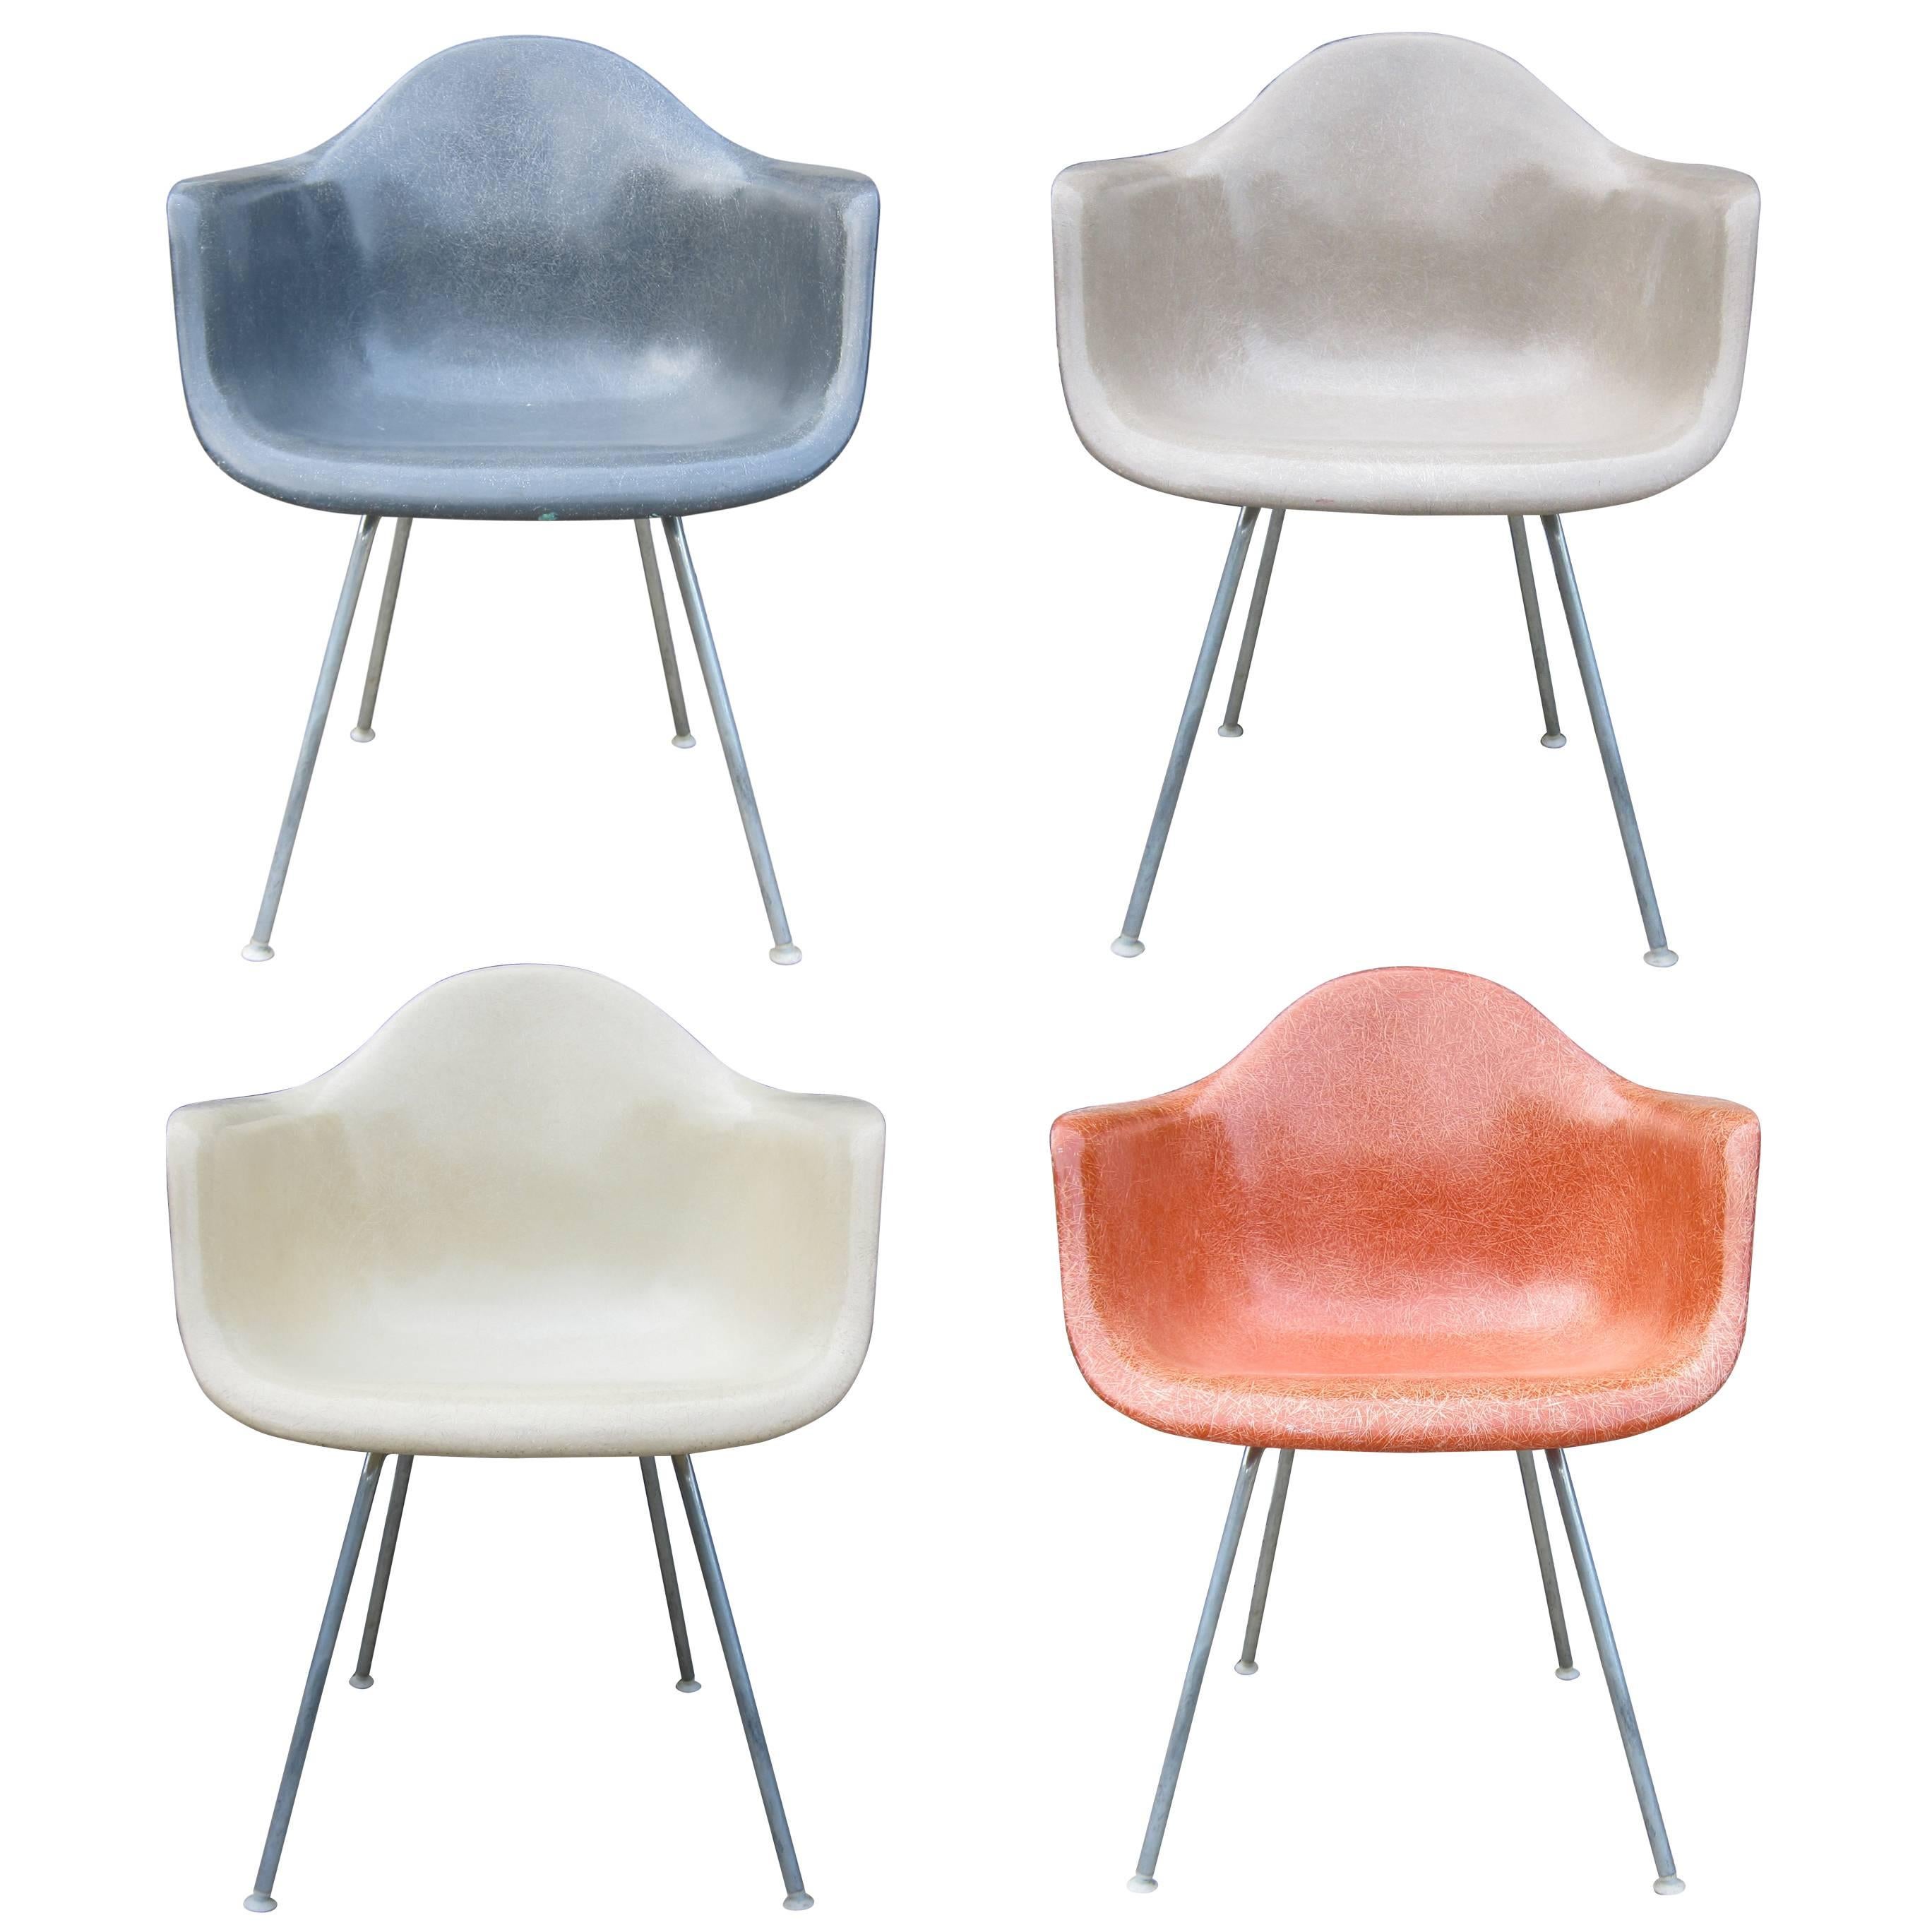 Four Herman Miller Eames Multicolored Armchairs